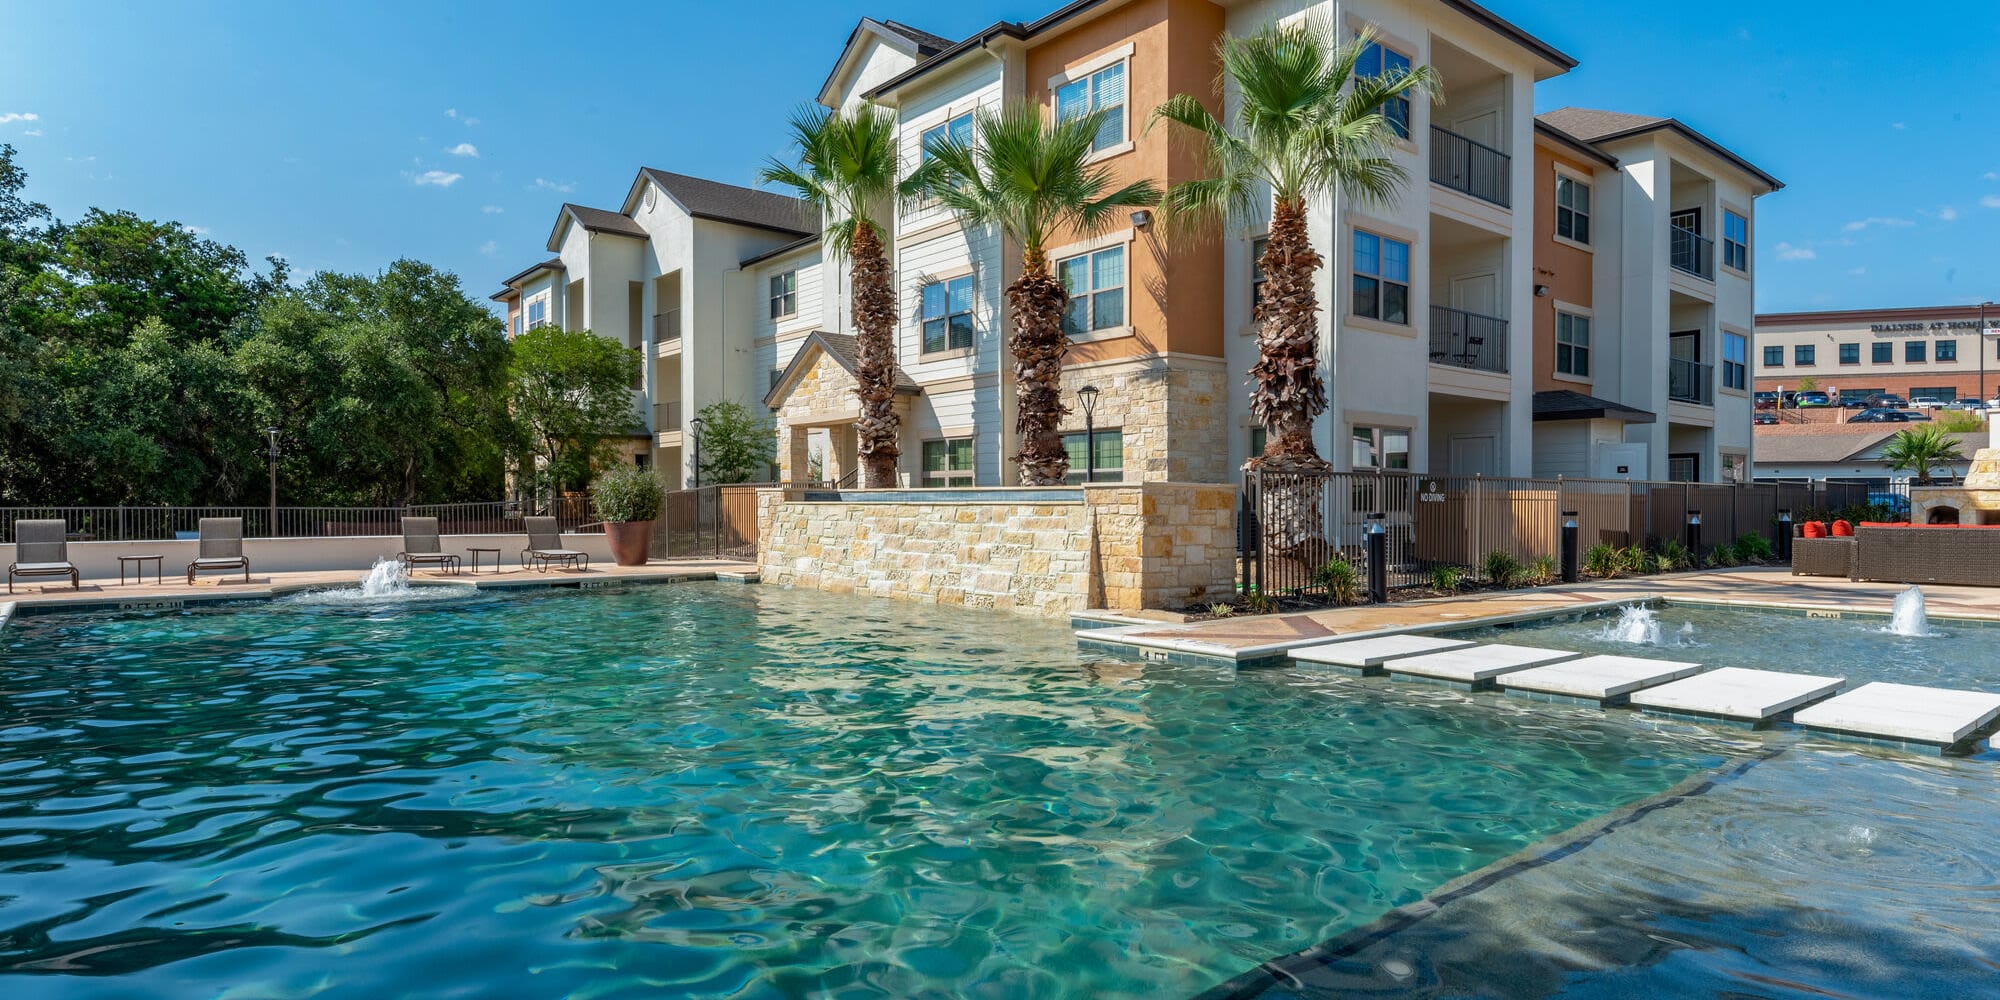 Exterior of building with pool at Alannah at Westover Hills in San Antonio, Texas